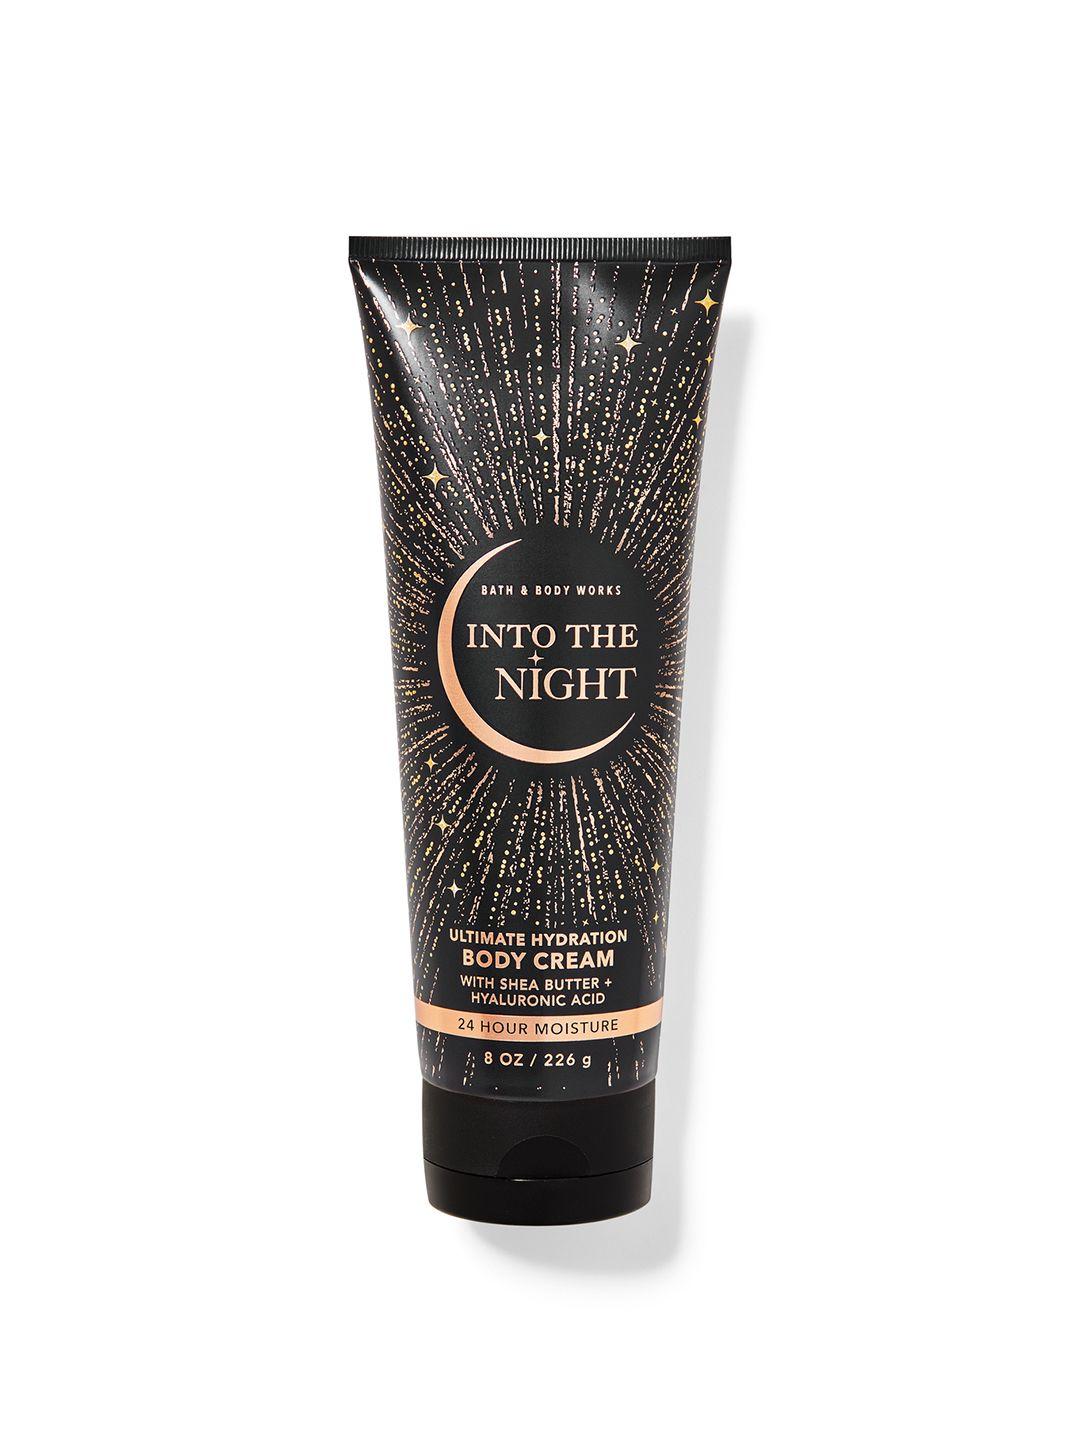 bath-&-body-works-into-the-night-ultimate-hydration-body-cream-with-hyaluronic-acid---226g